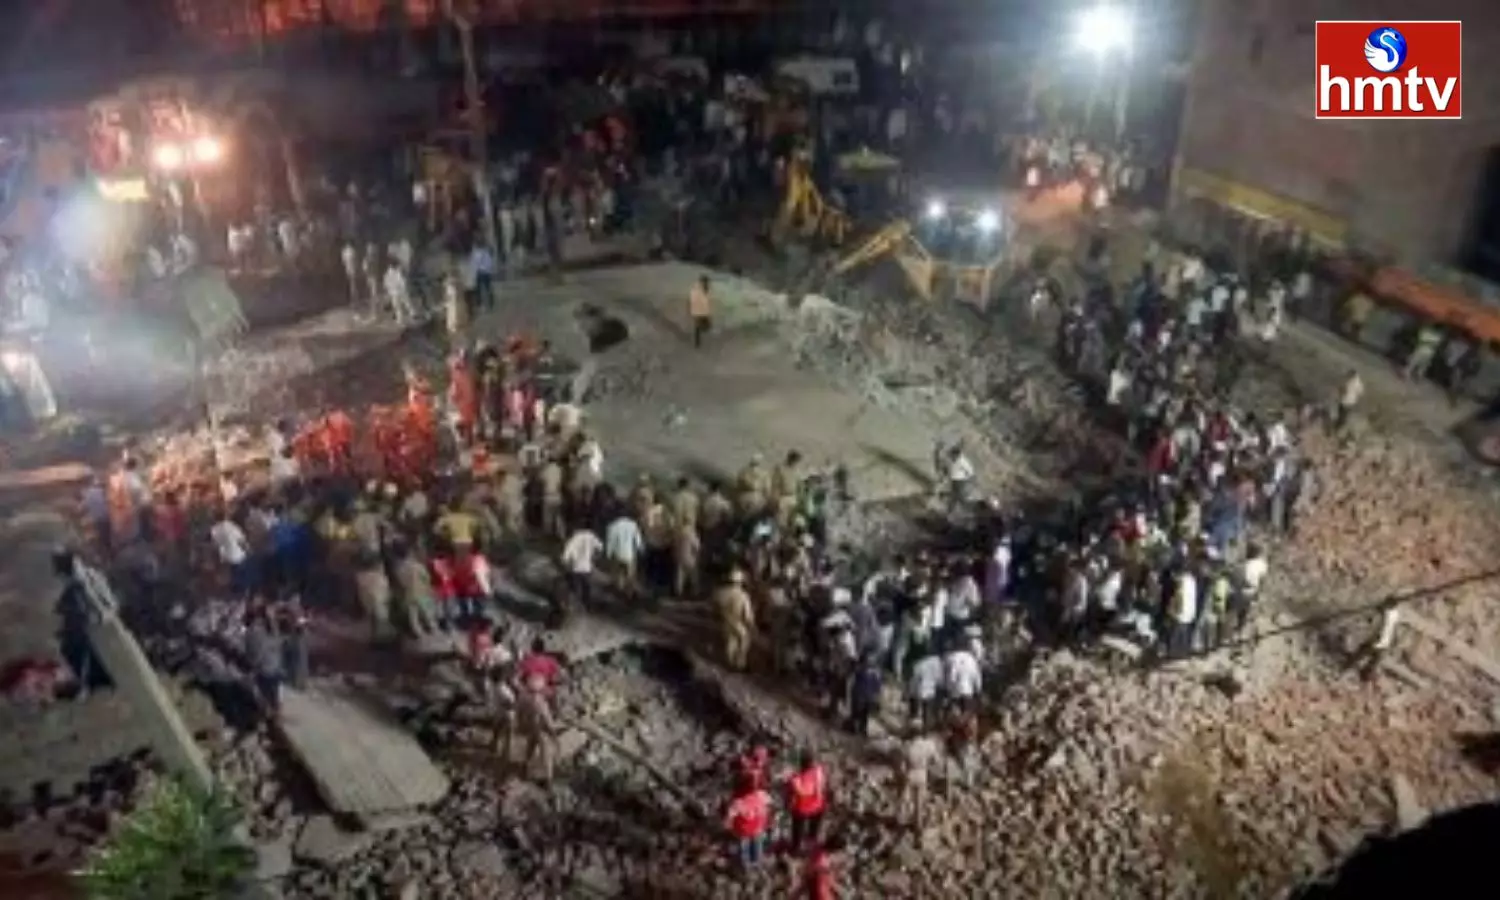 2 killed, 17 injured after Building Collapsed in Uttar Pradesh